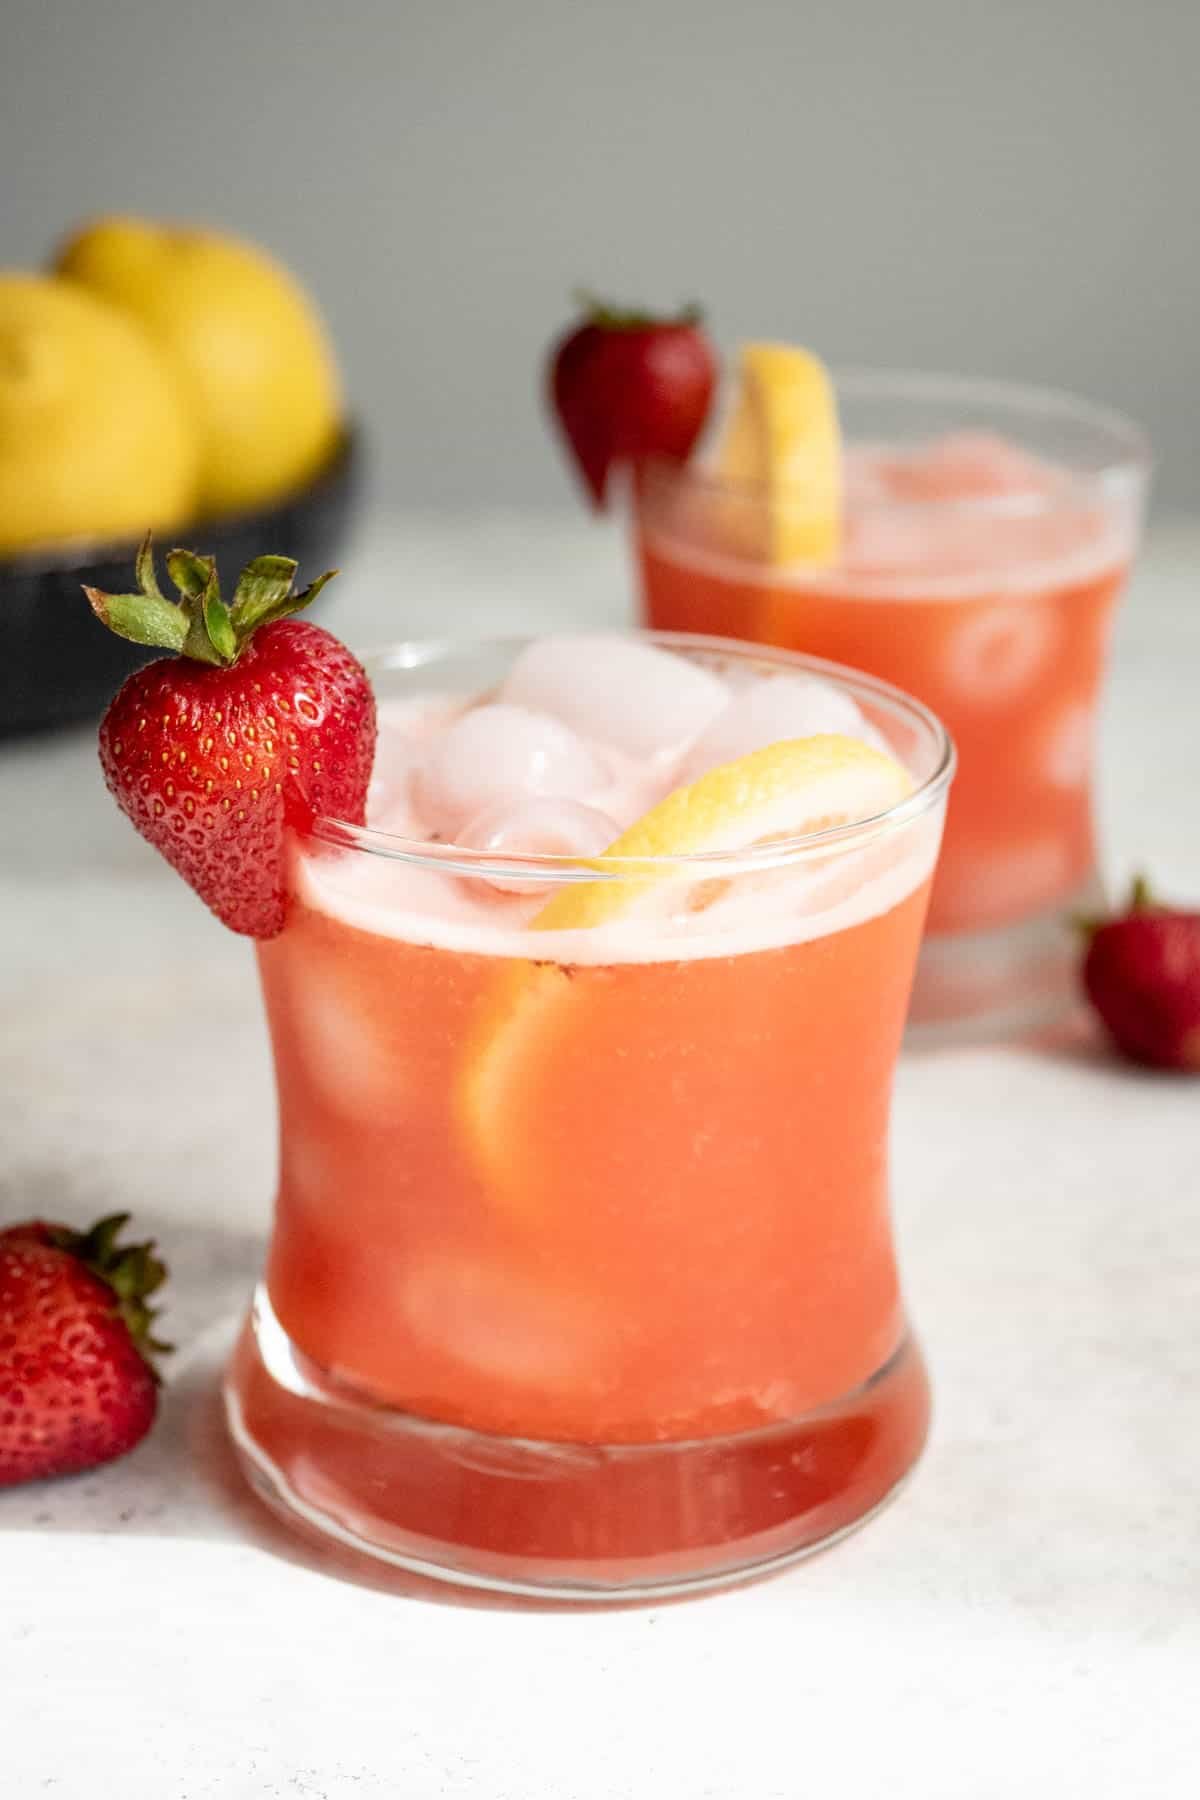 a glass of strawberry lemonade garnished with a strawberry and a lemon slice in front of another glass of strawberry lemonade and a bowl of lemons.